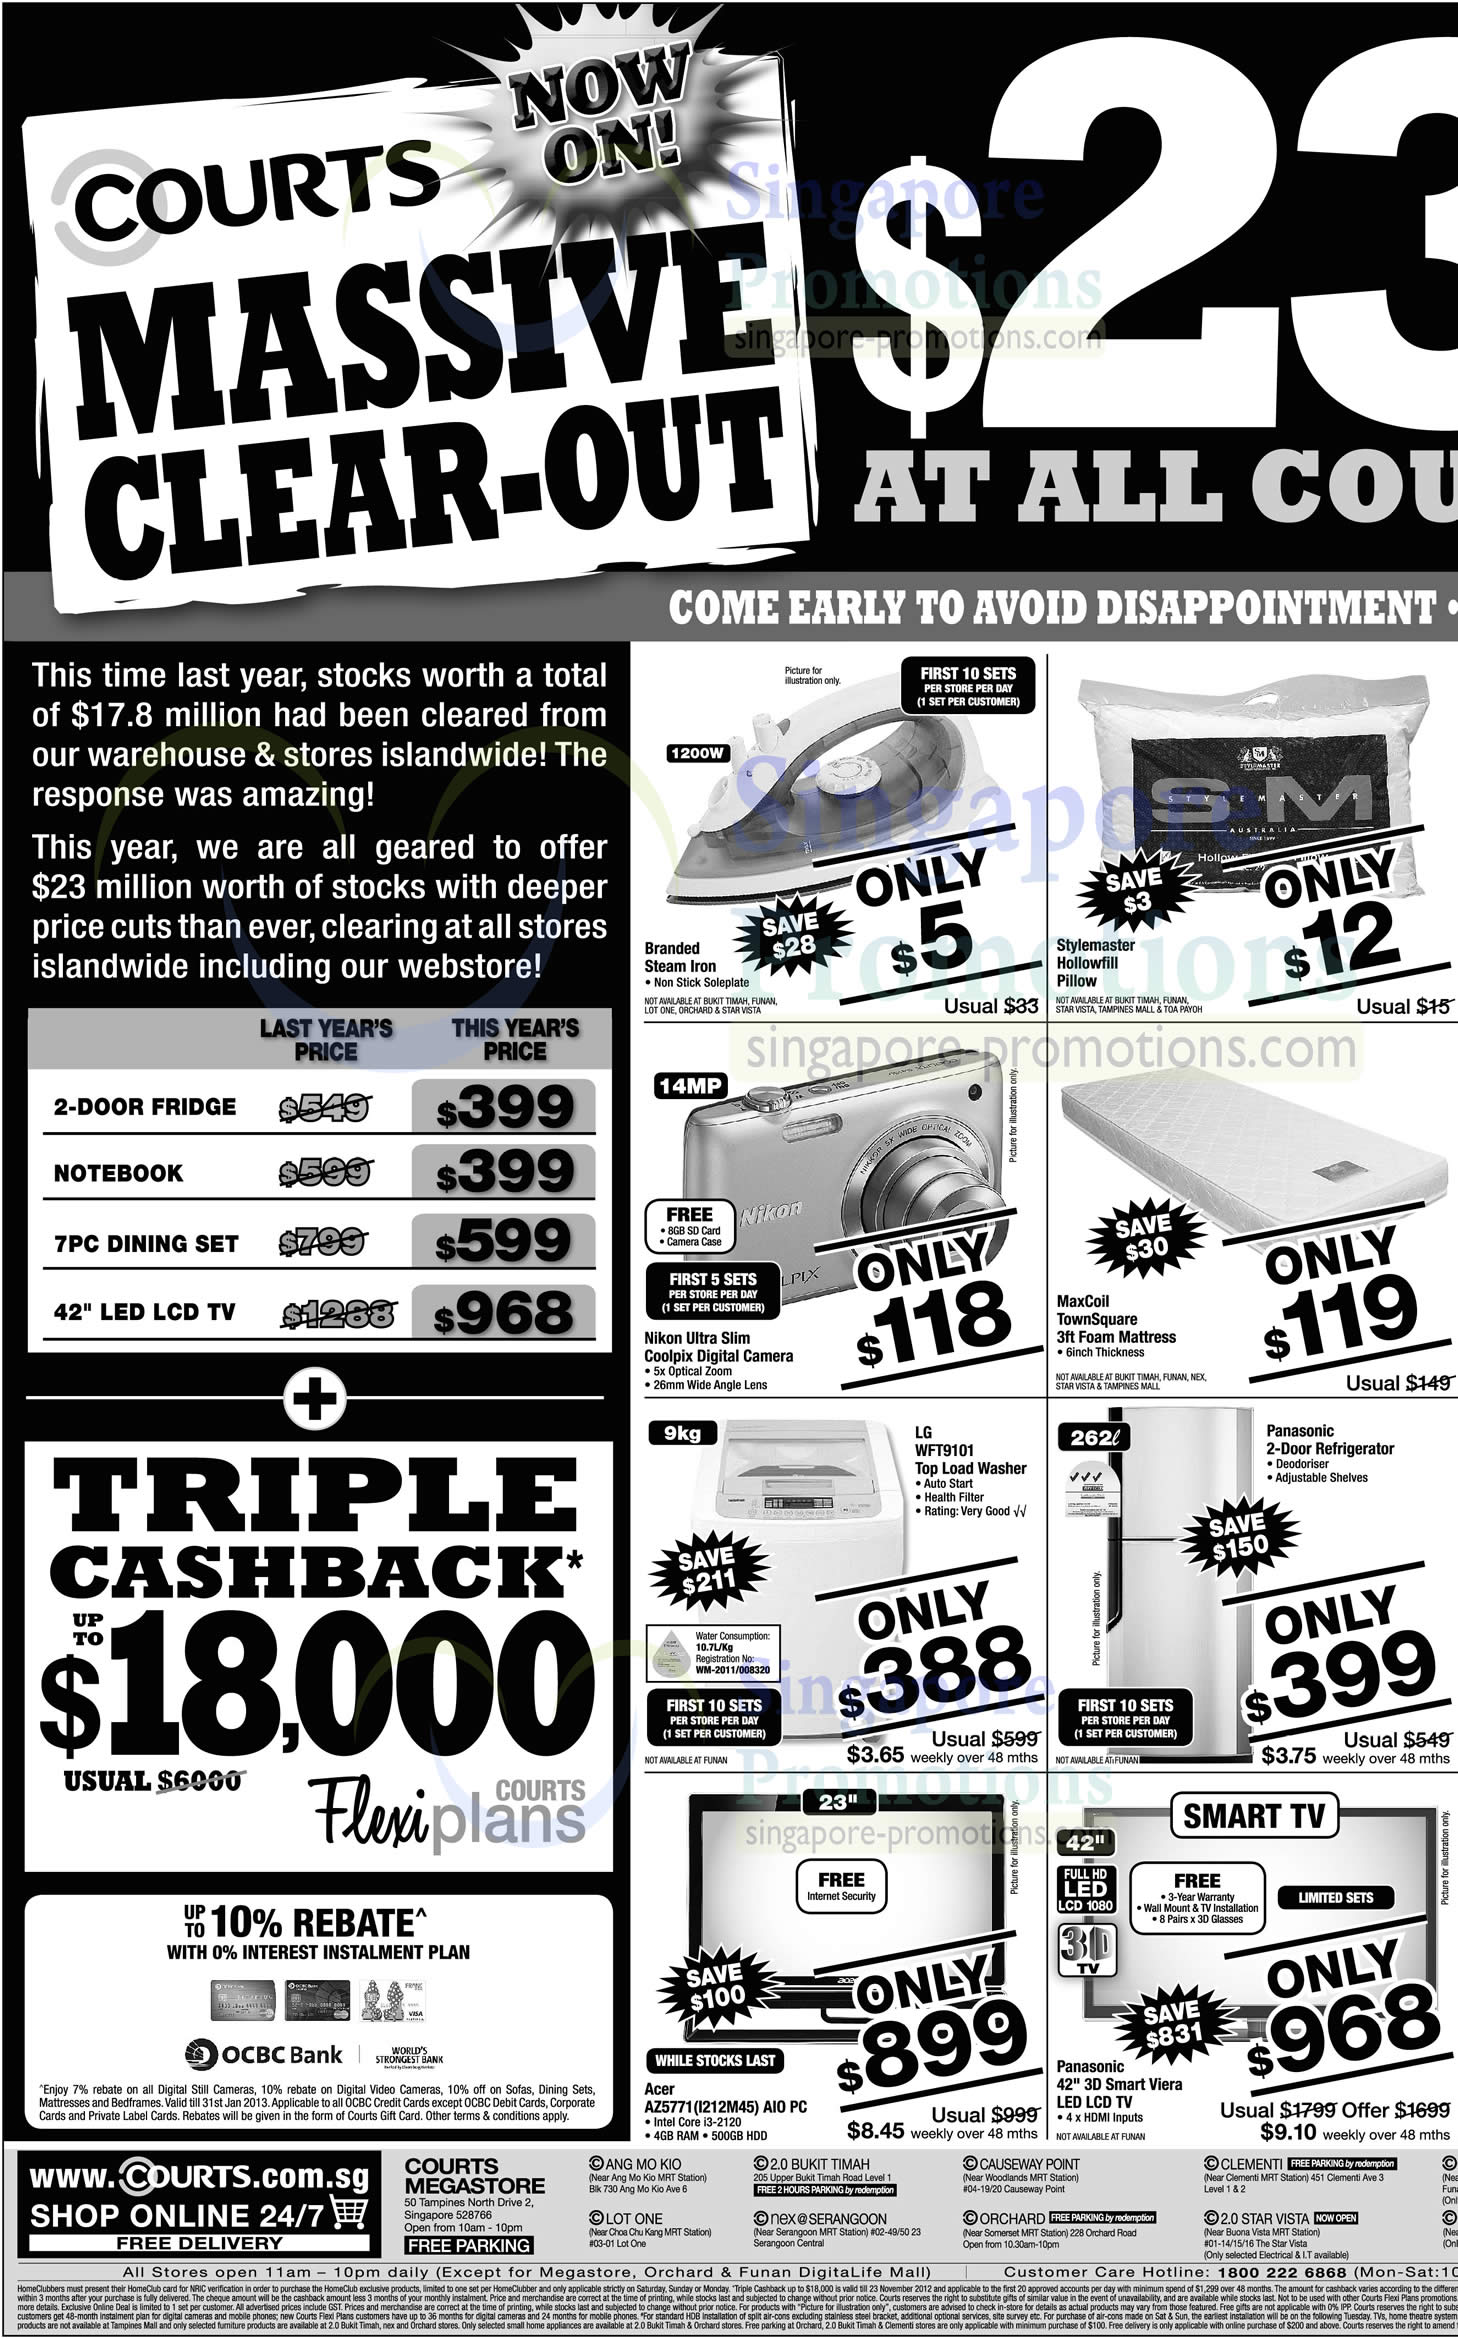 Featured image for Courts Massive Clear-Out Promotion Offers 2 - 5 Nov 2012